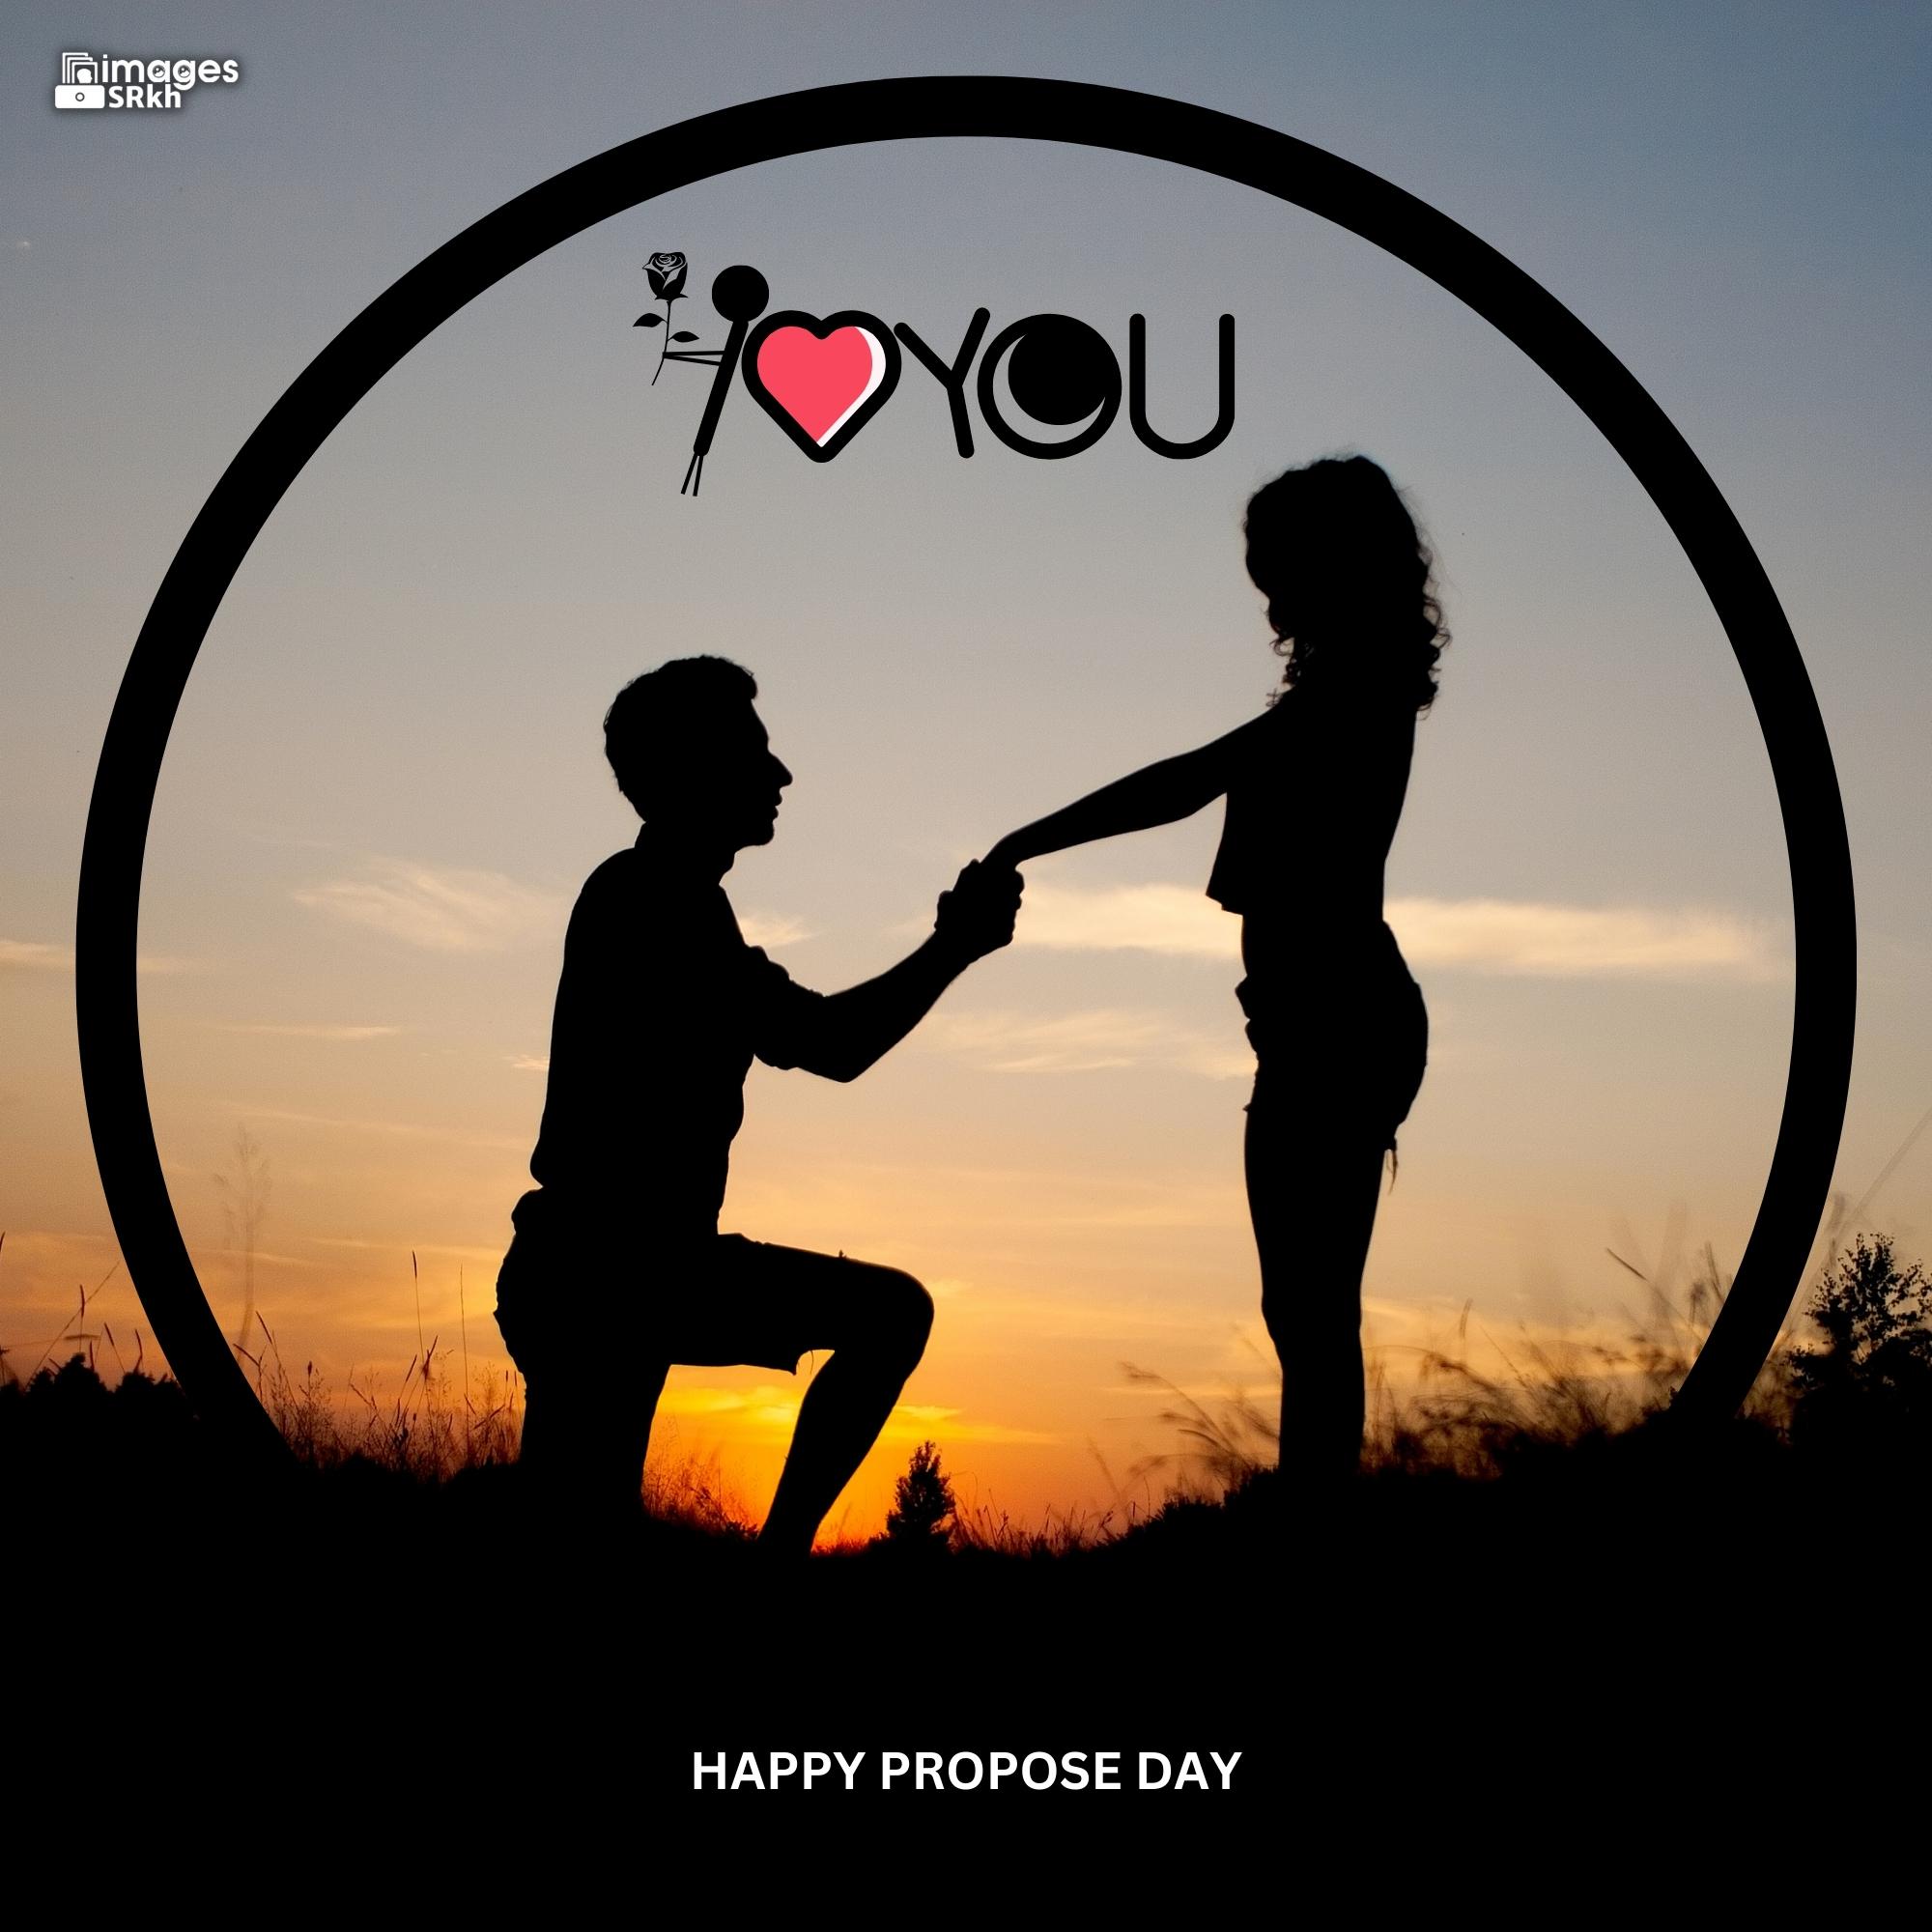 🔥 Happy Propose Day Images | 396 | I LOVE YOU Download free - Images SRkh